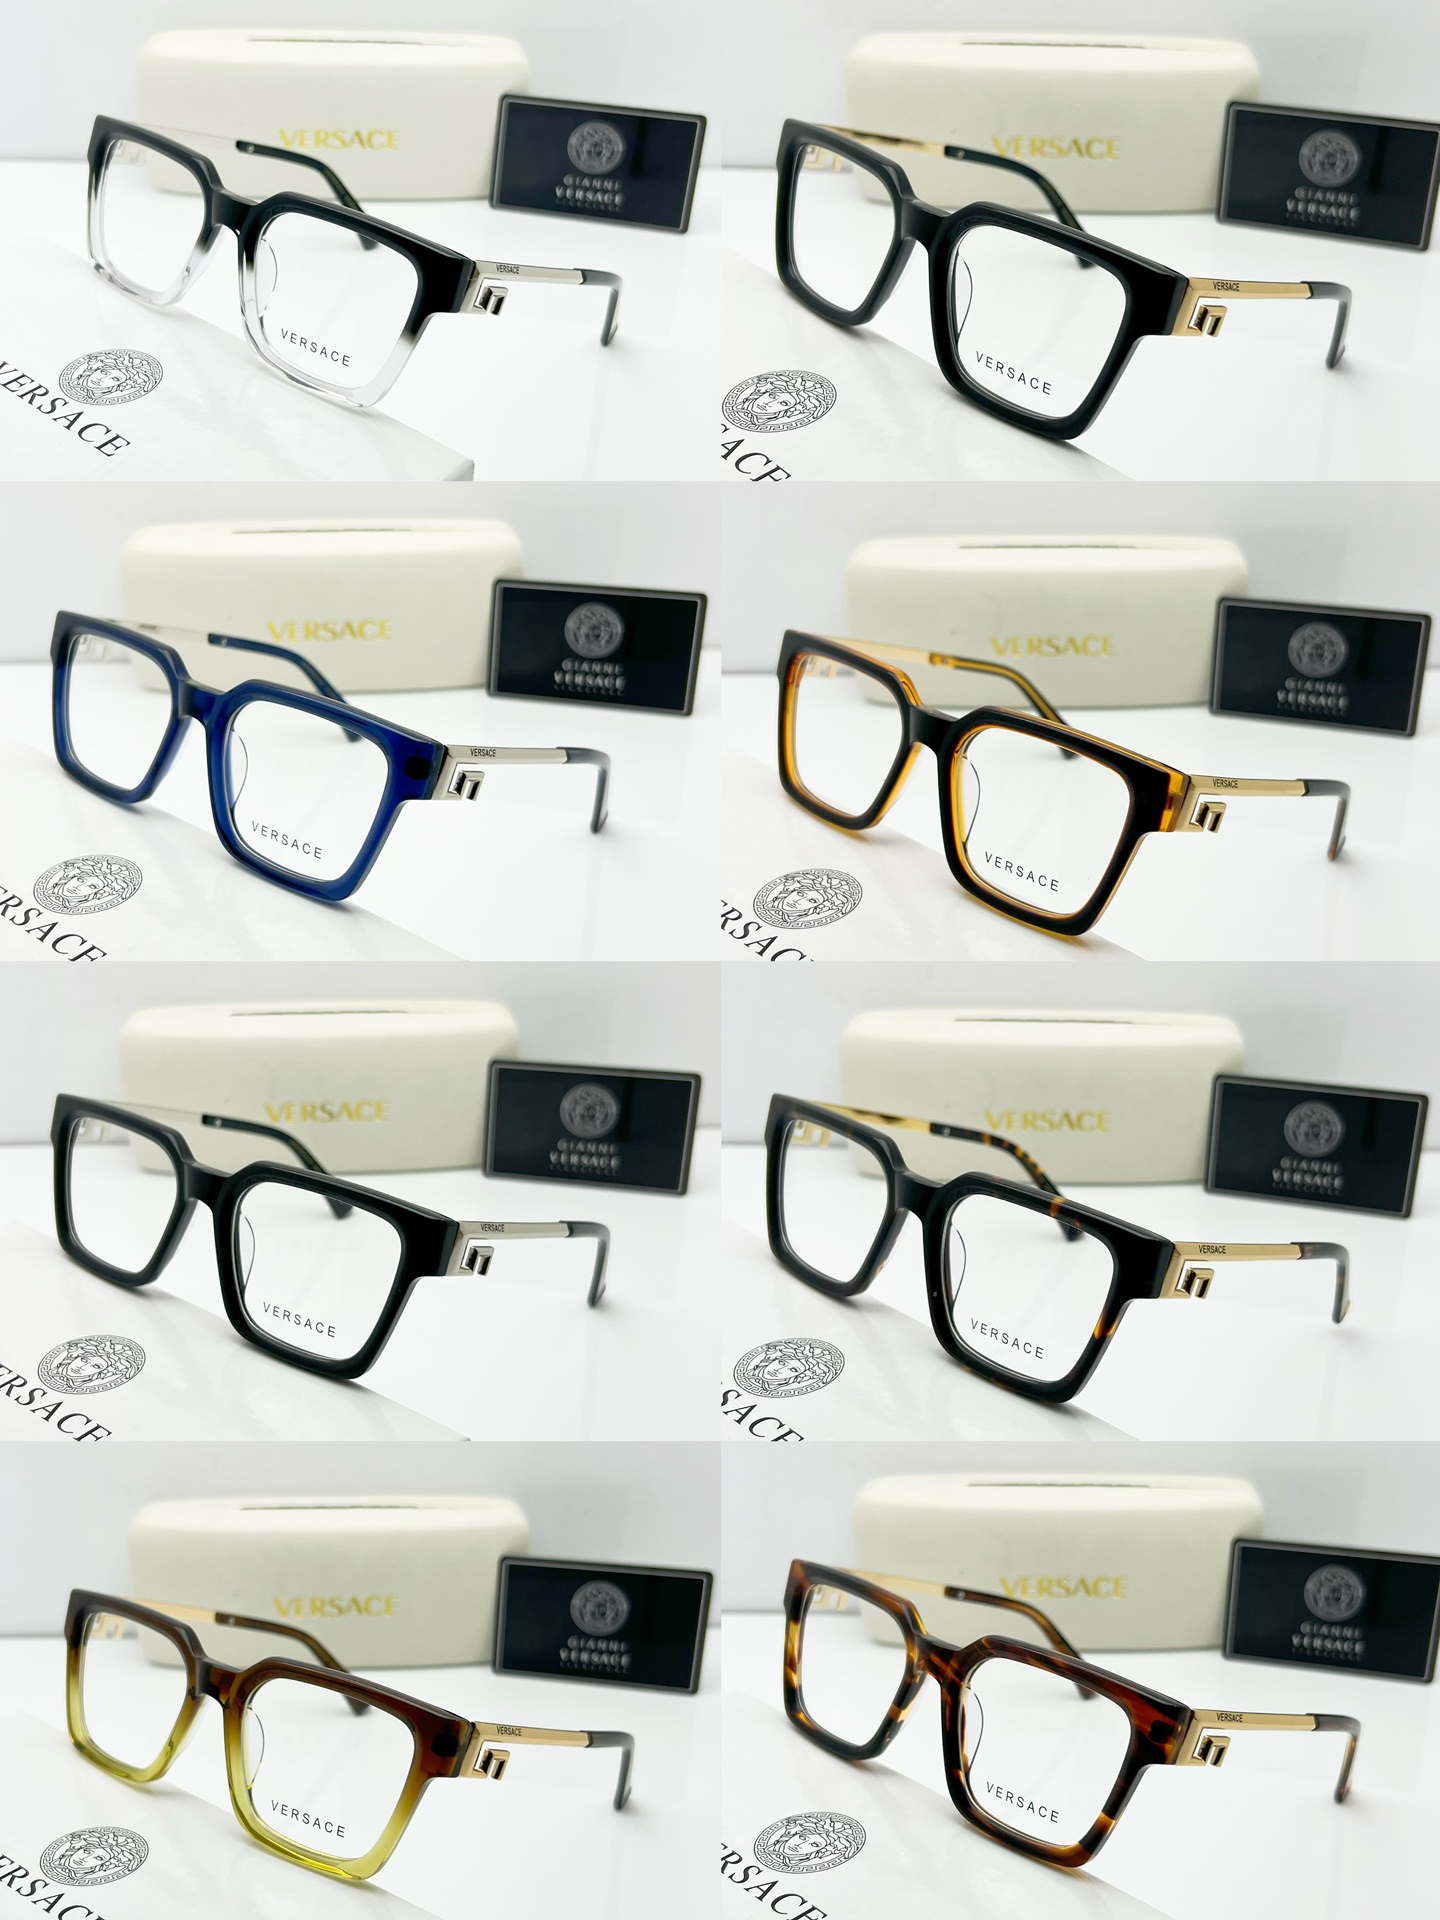 collection 2 of fake versace glasses frames 3311